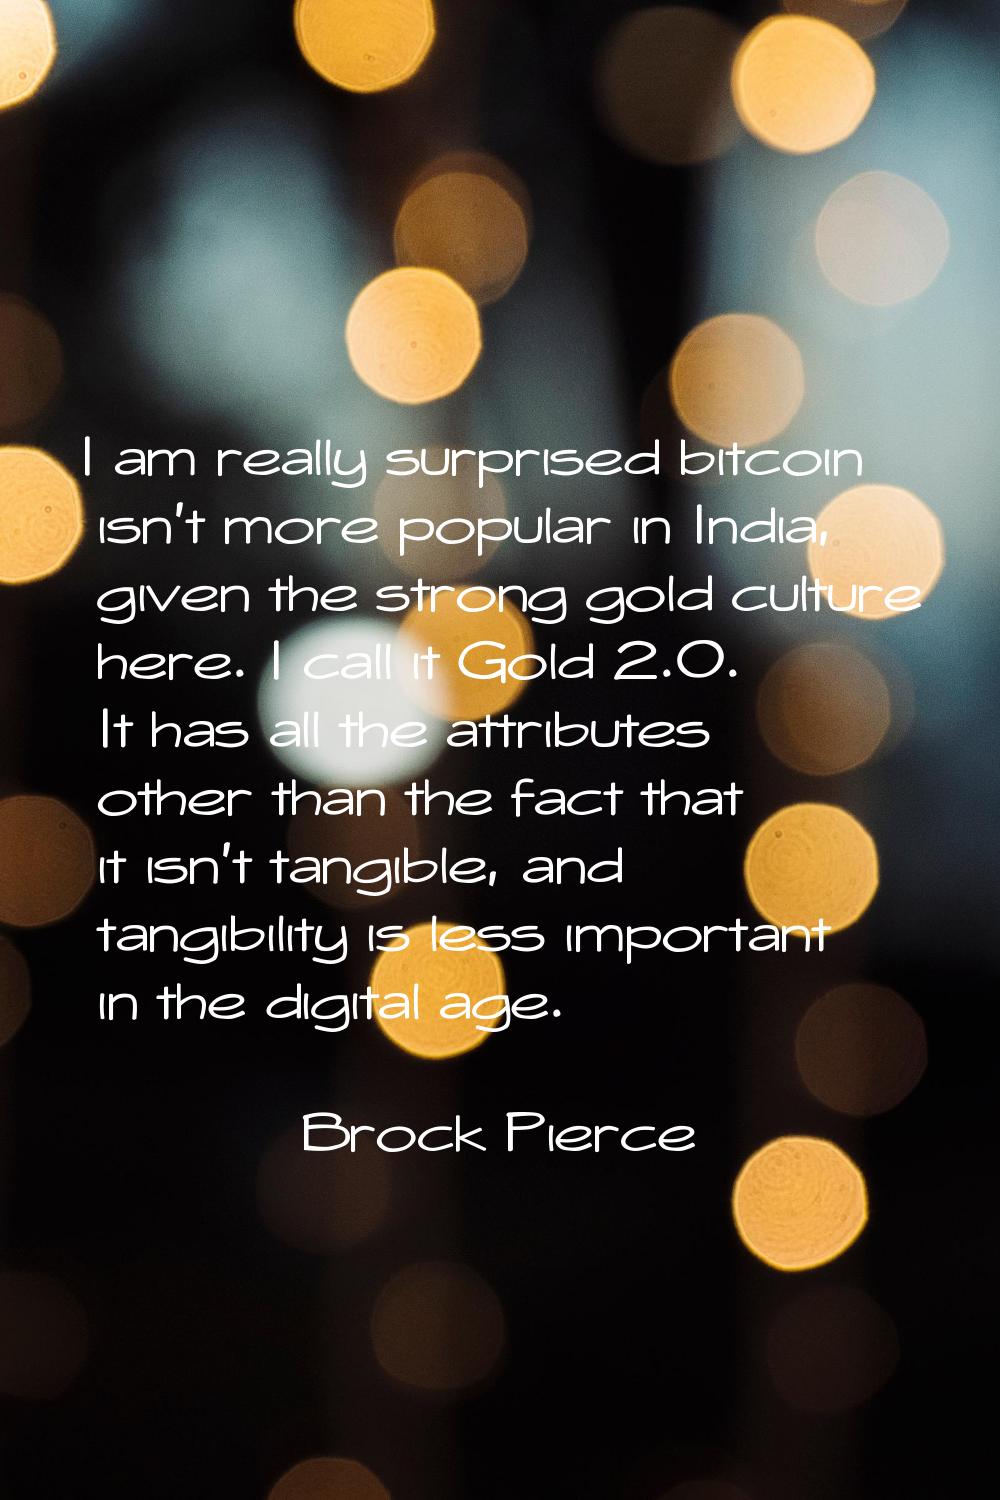 I am really surprised bitcoin isn't more popular in India, given the strong gold culture here. I ca